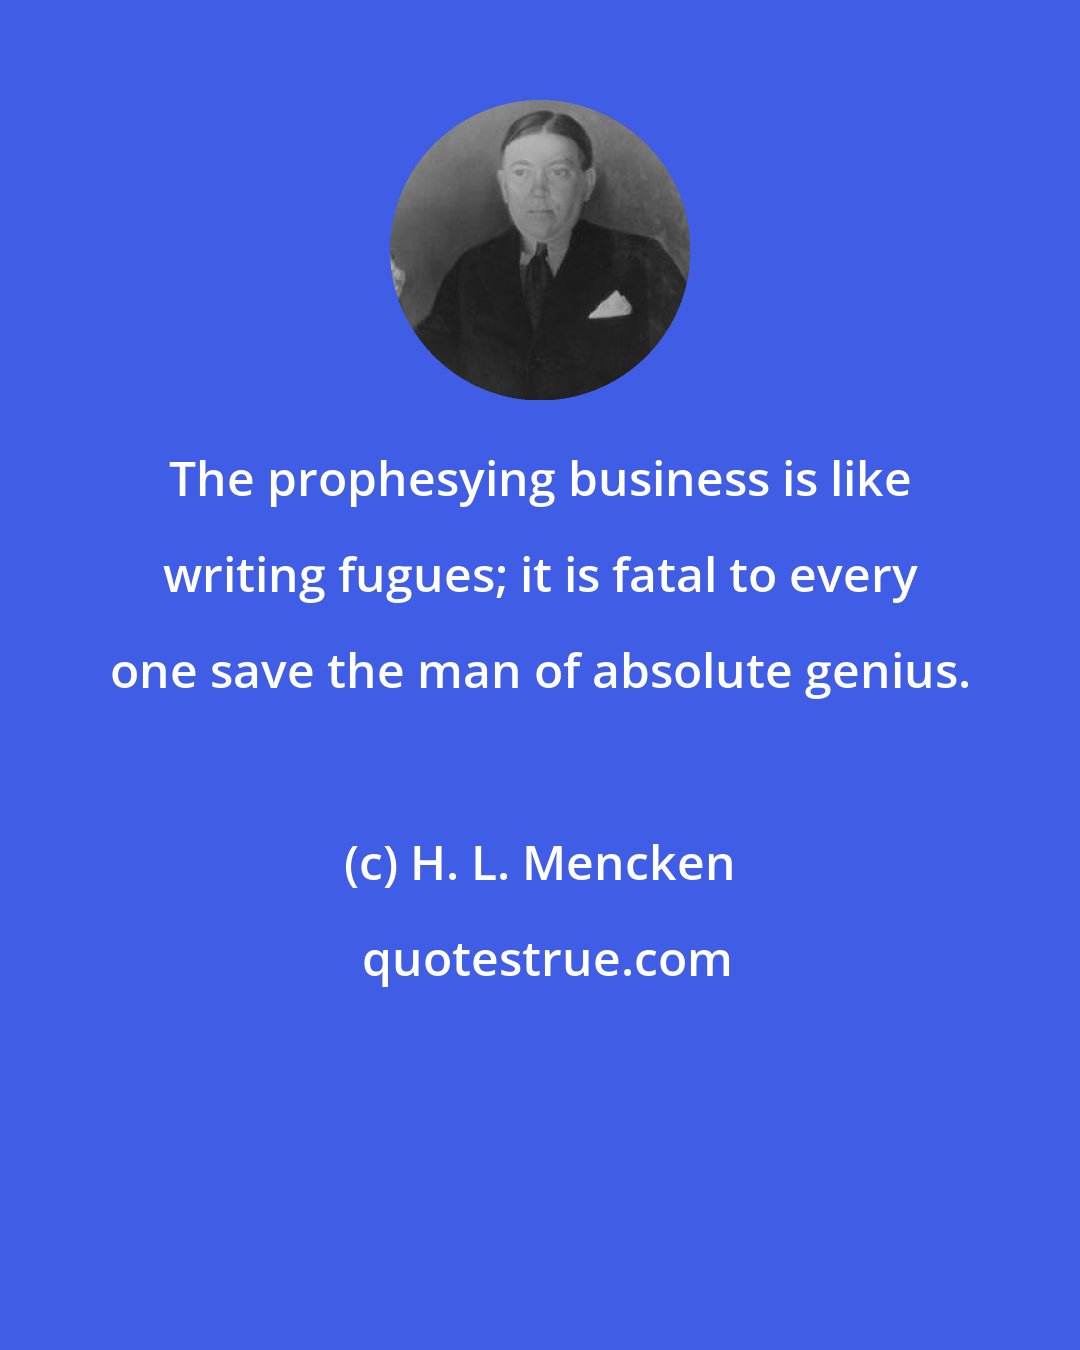 H. L. Mencken: The prophesying business is like writing fugues; it is fatal to every one save the man of absolute genius.